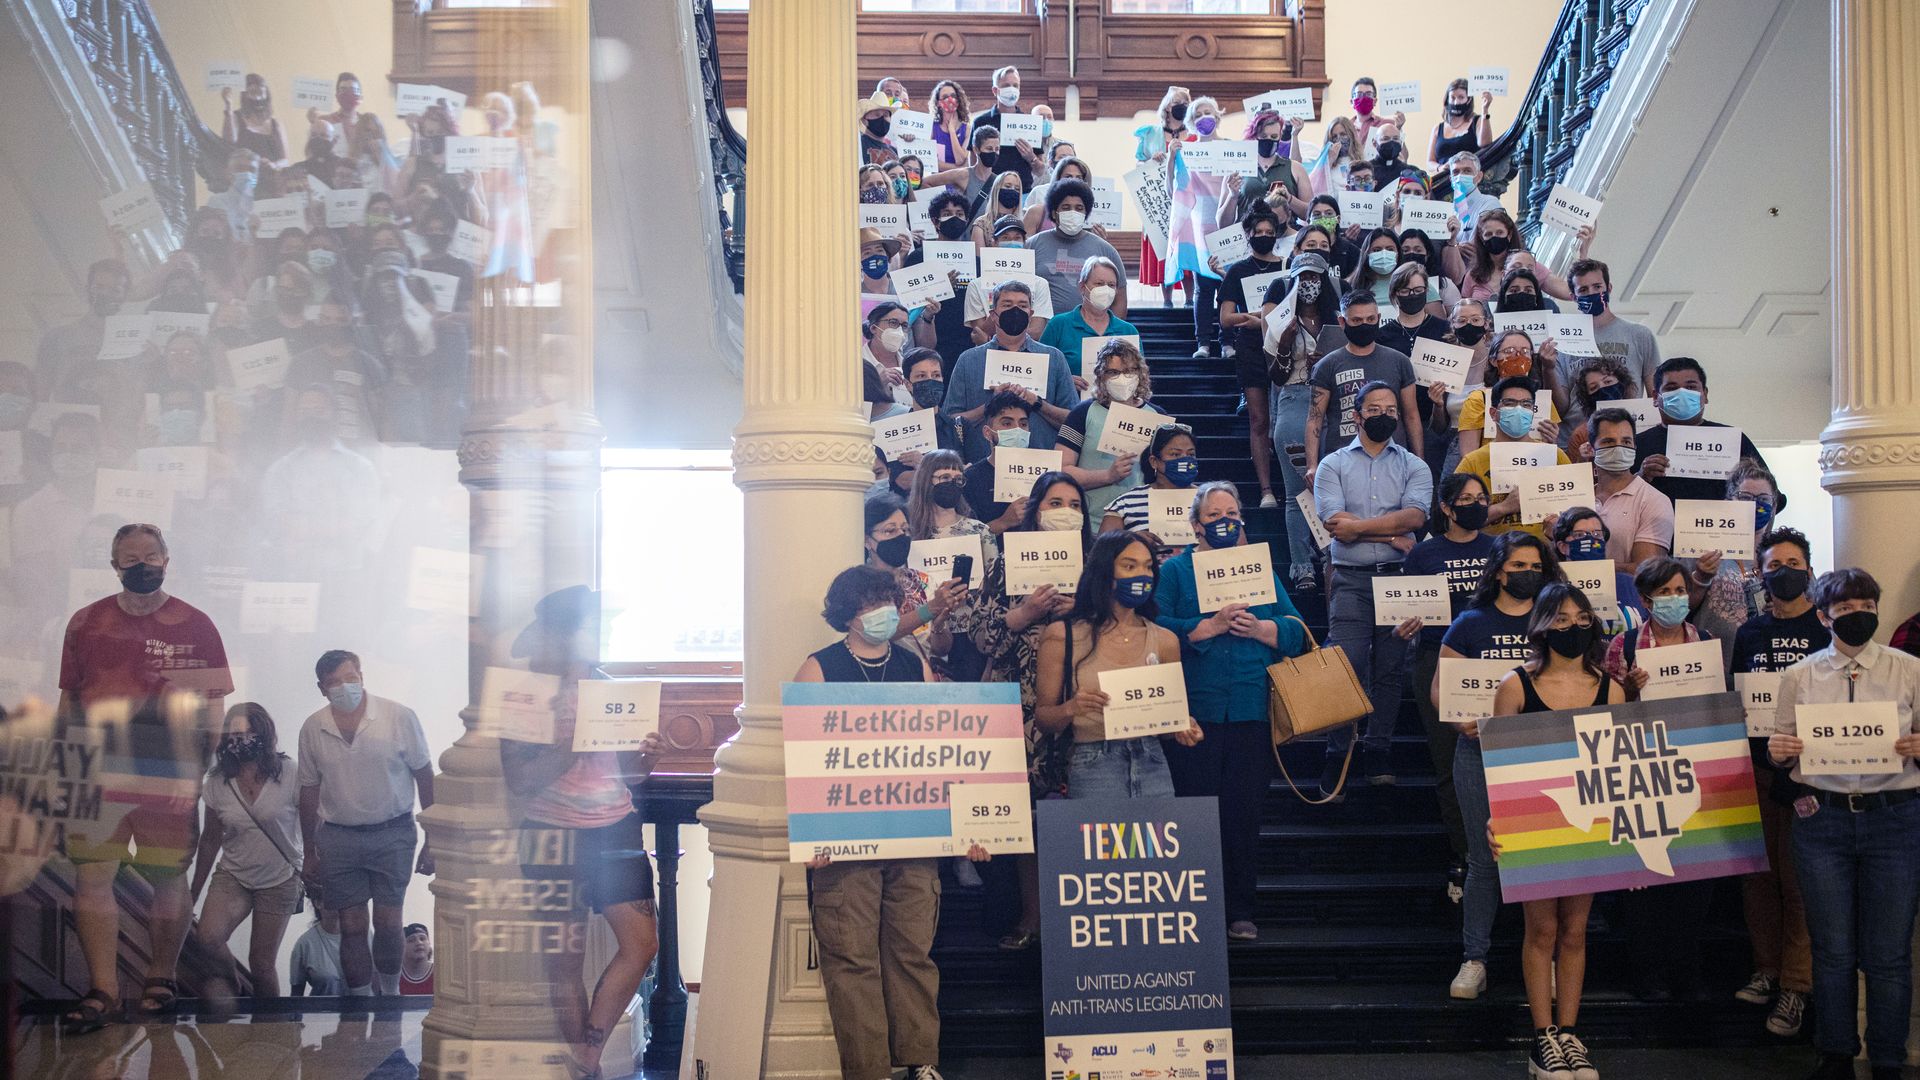 LGBTQ rights supporters gather at the Texas state capitol 